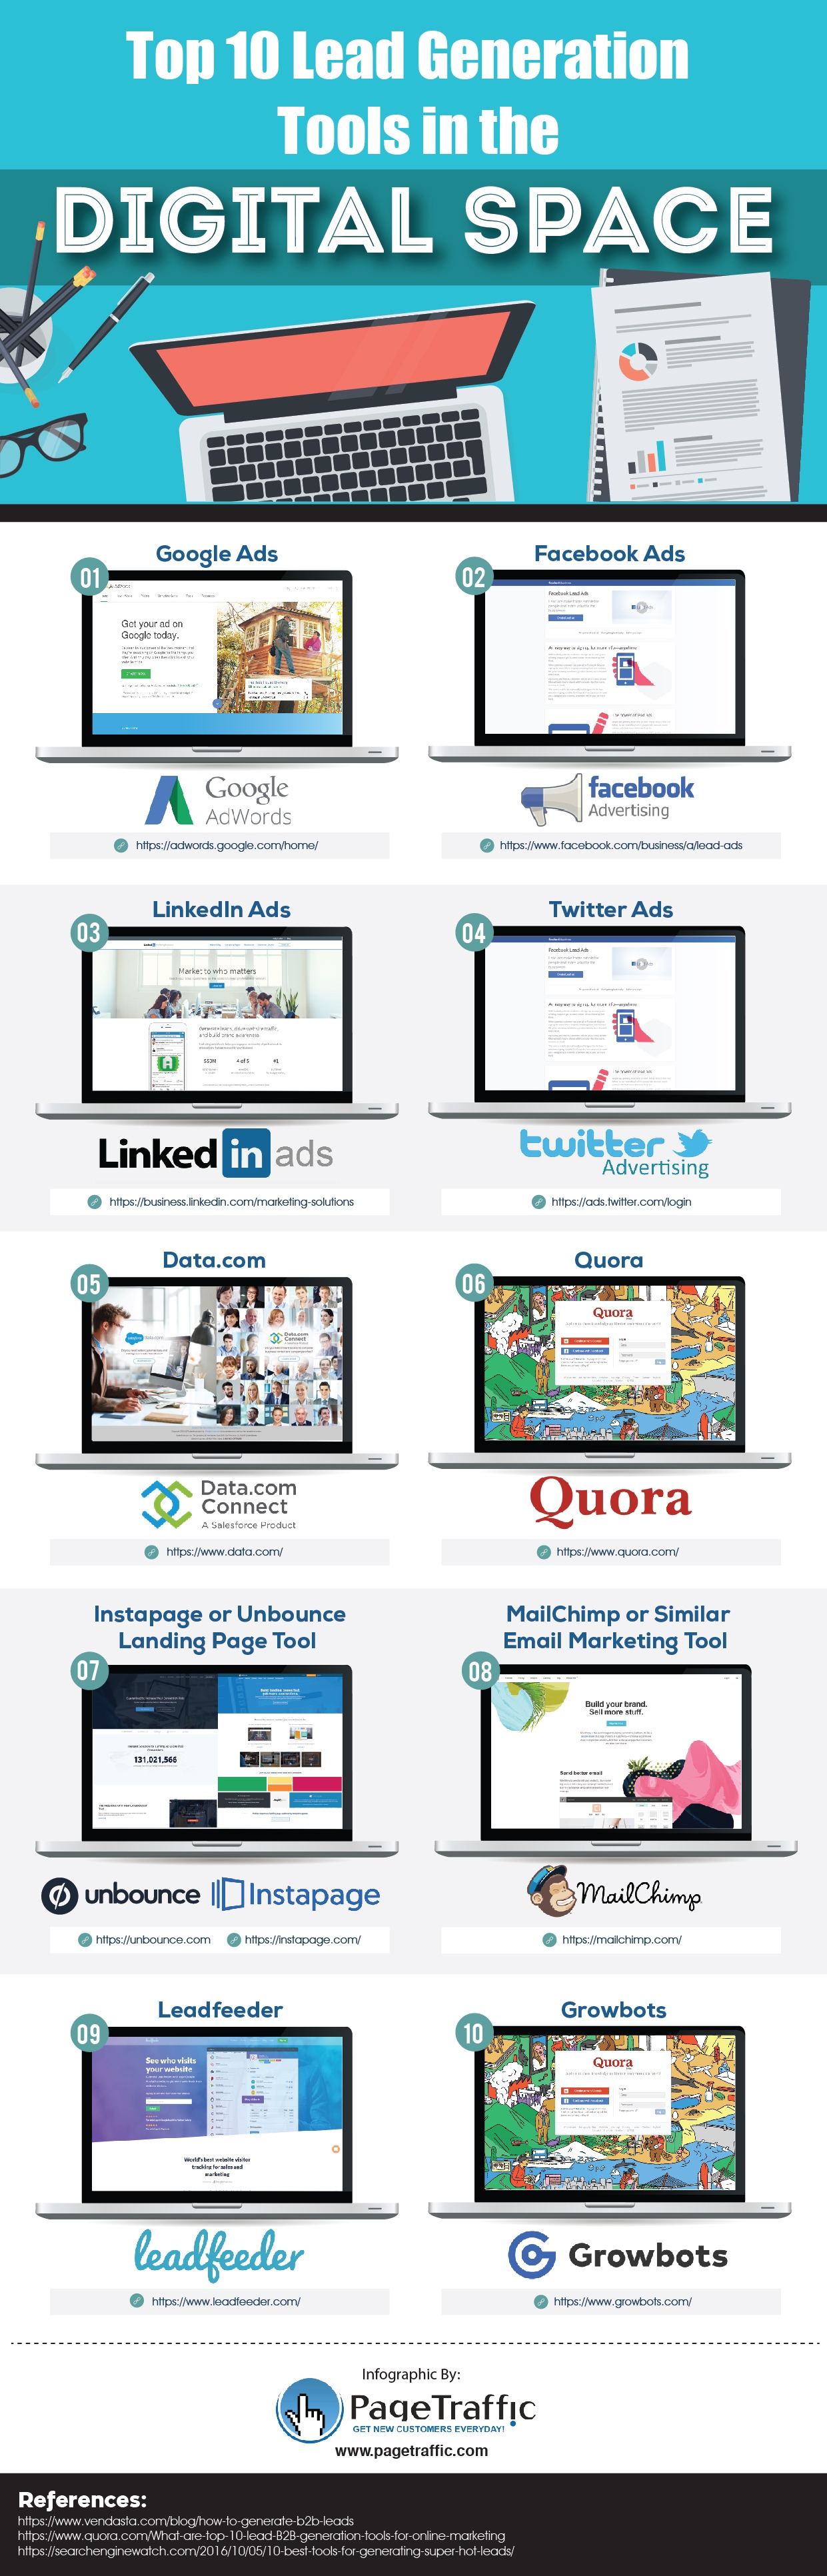 Top 10 Lead Generation Tools in Digital Marketing [Infographic]